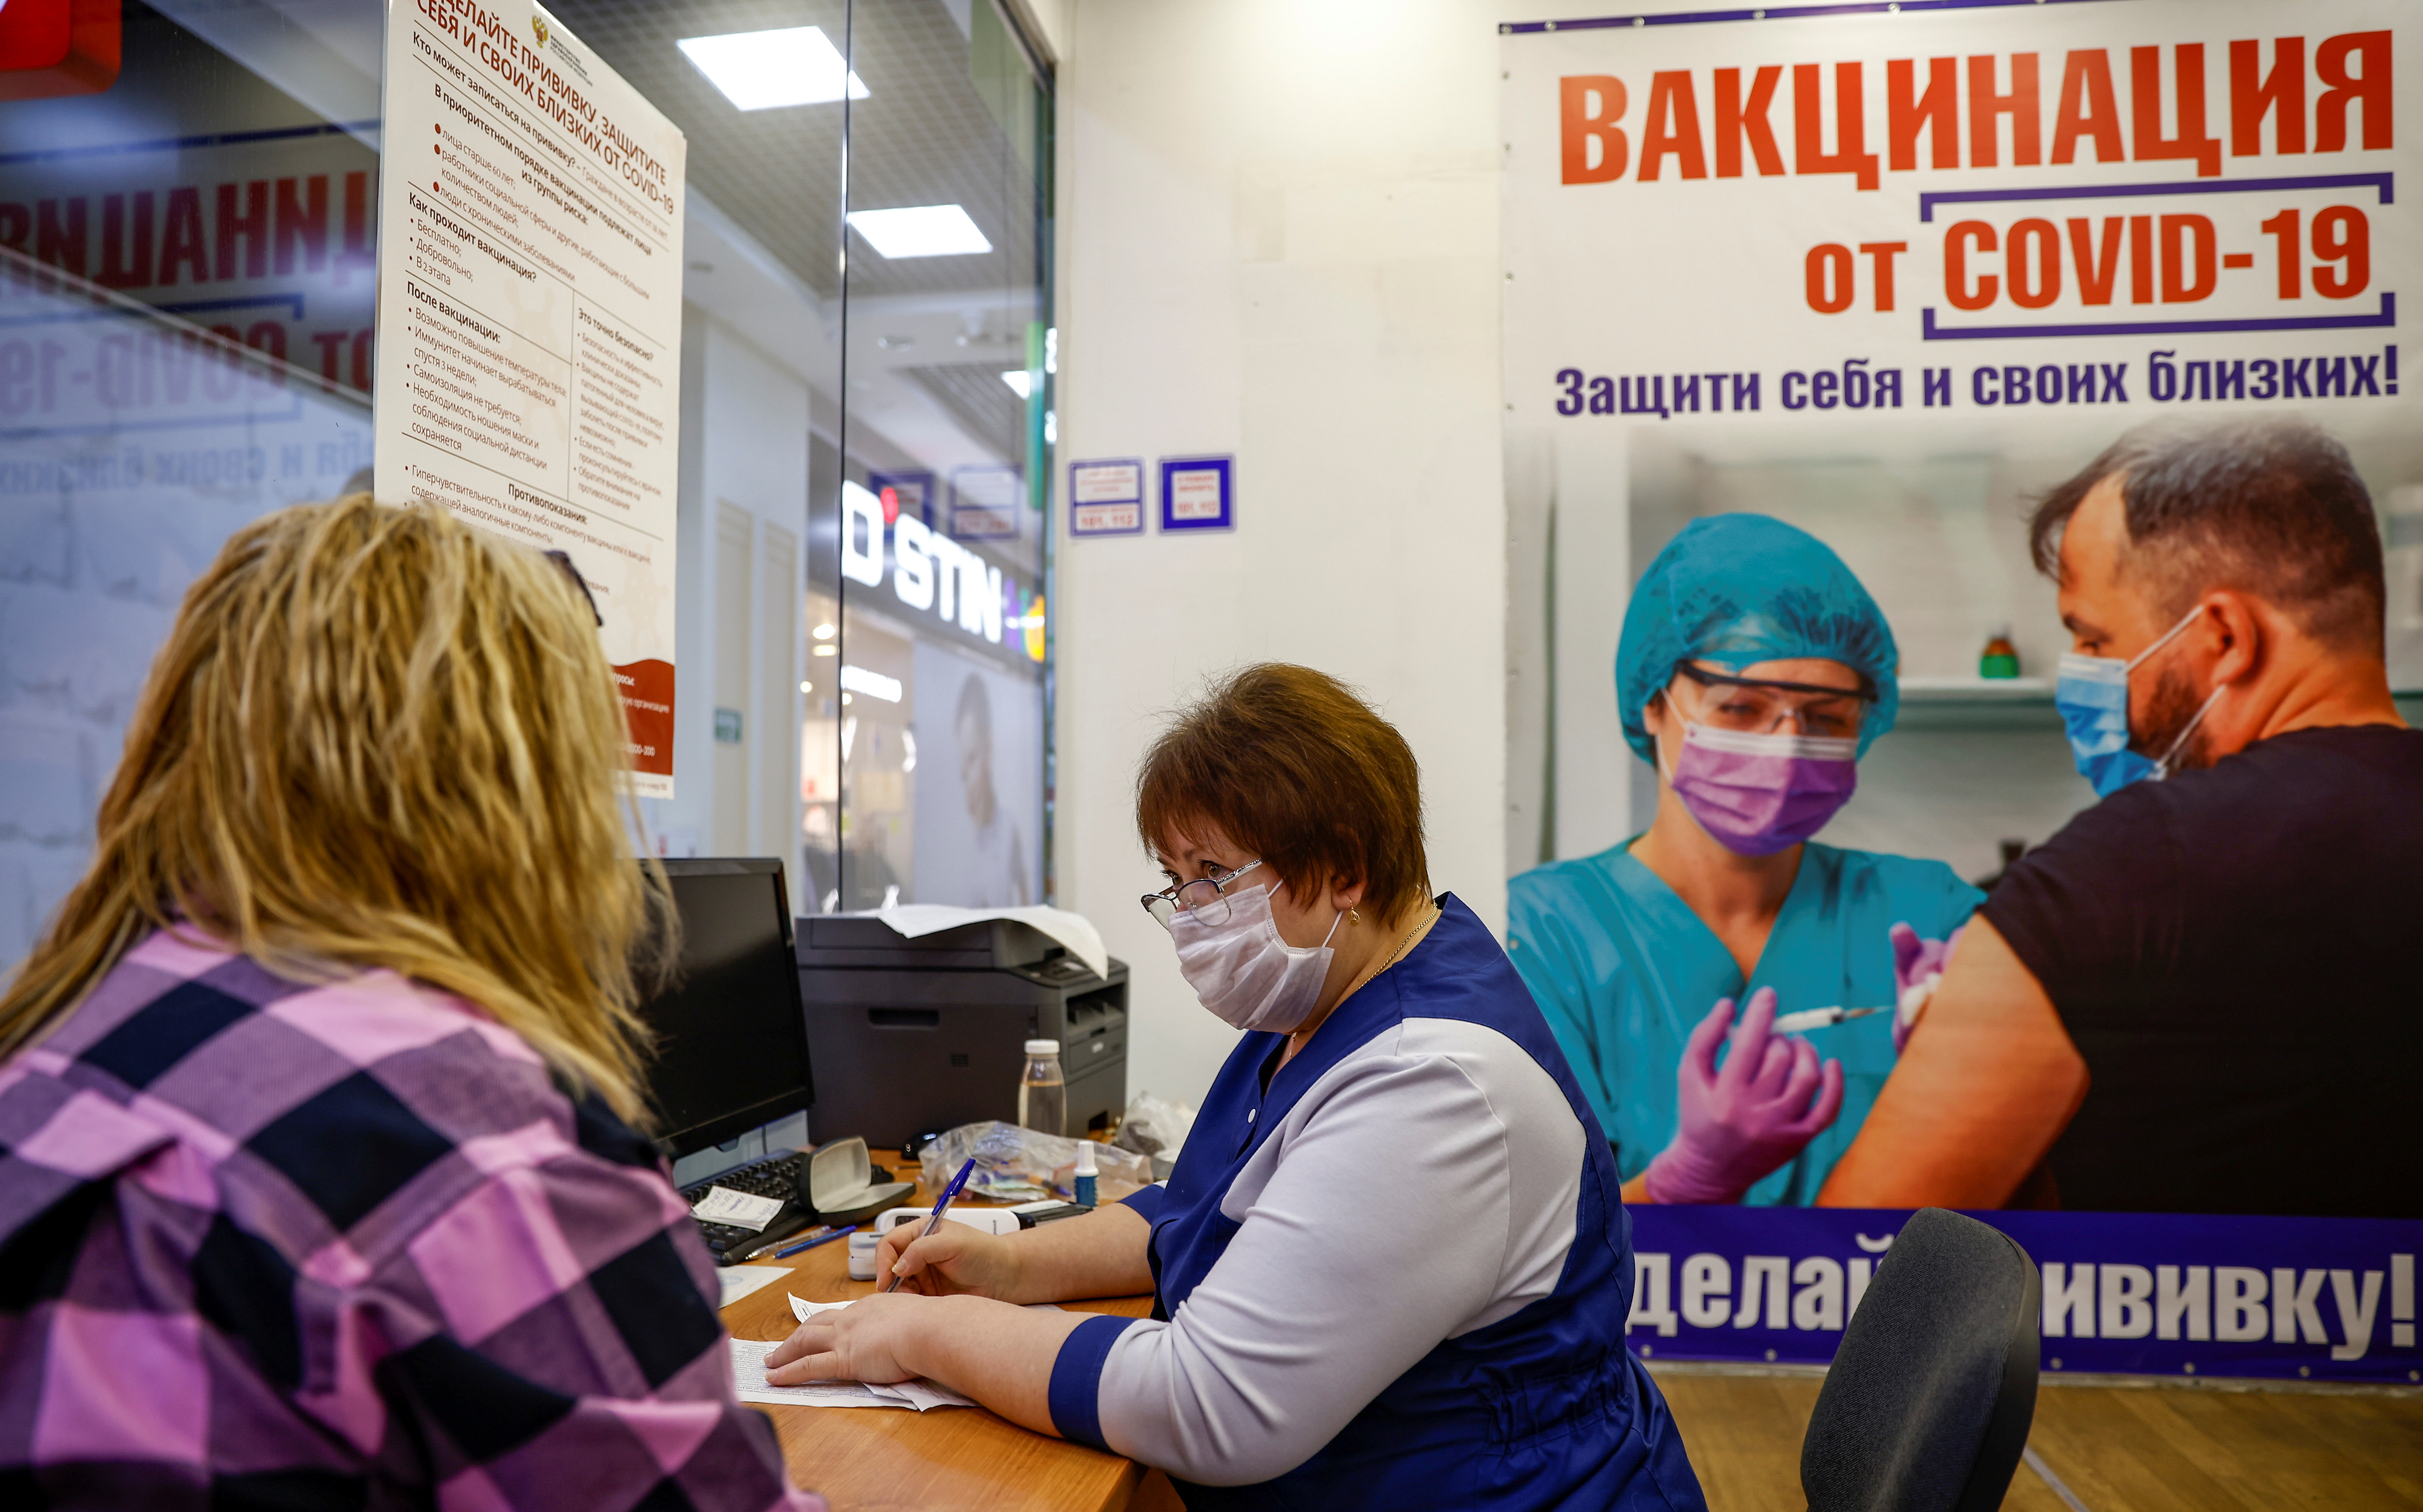 A medical worker registers documents of a patient at a vaccination centre in Oryol